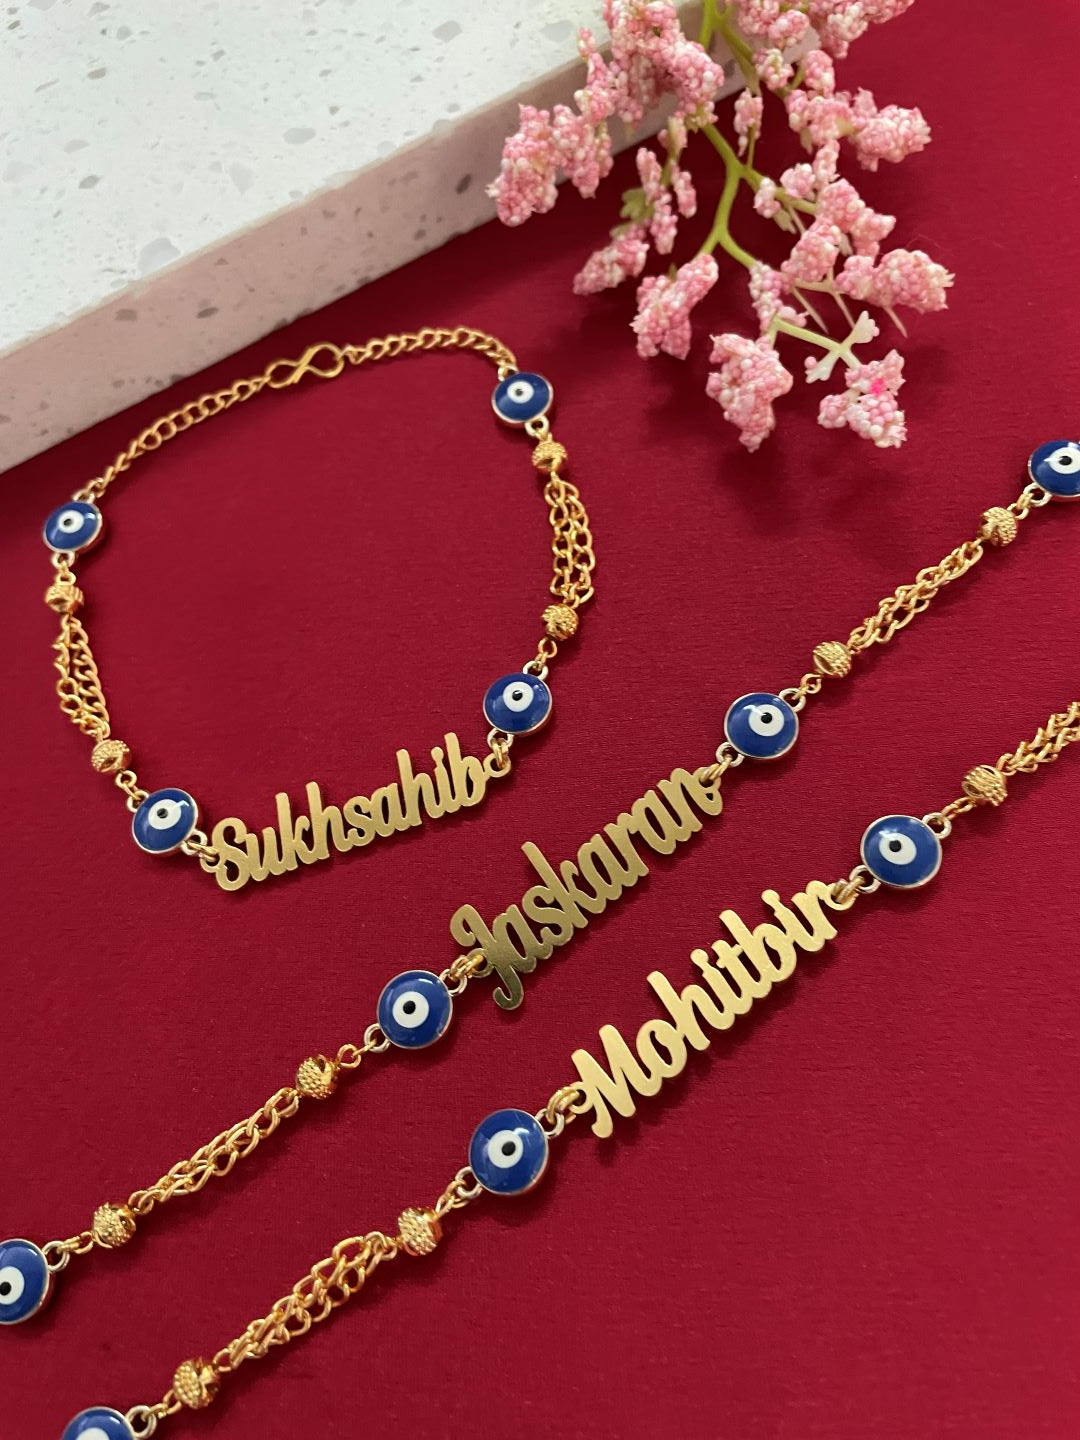 Personalized Name Bracelet in Gold Chain with Evil Eye